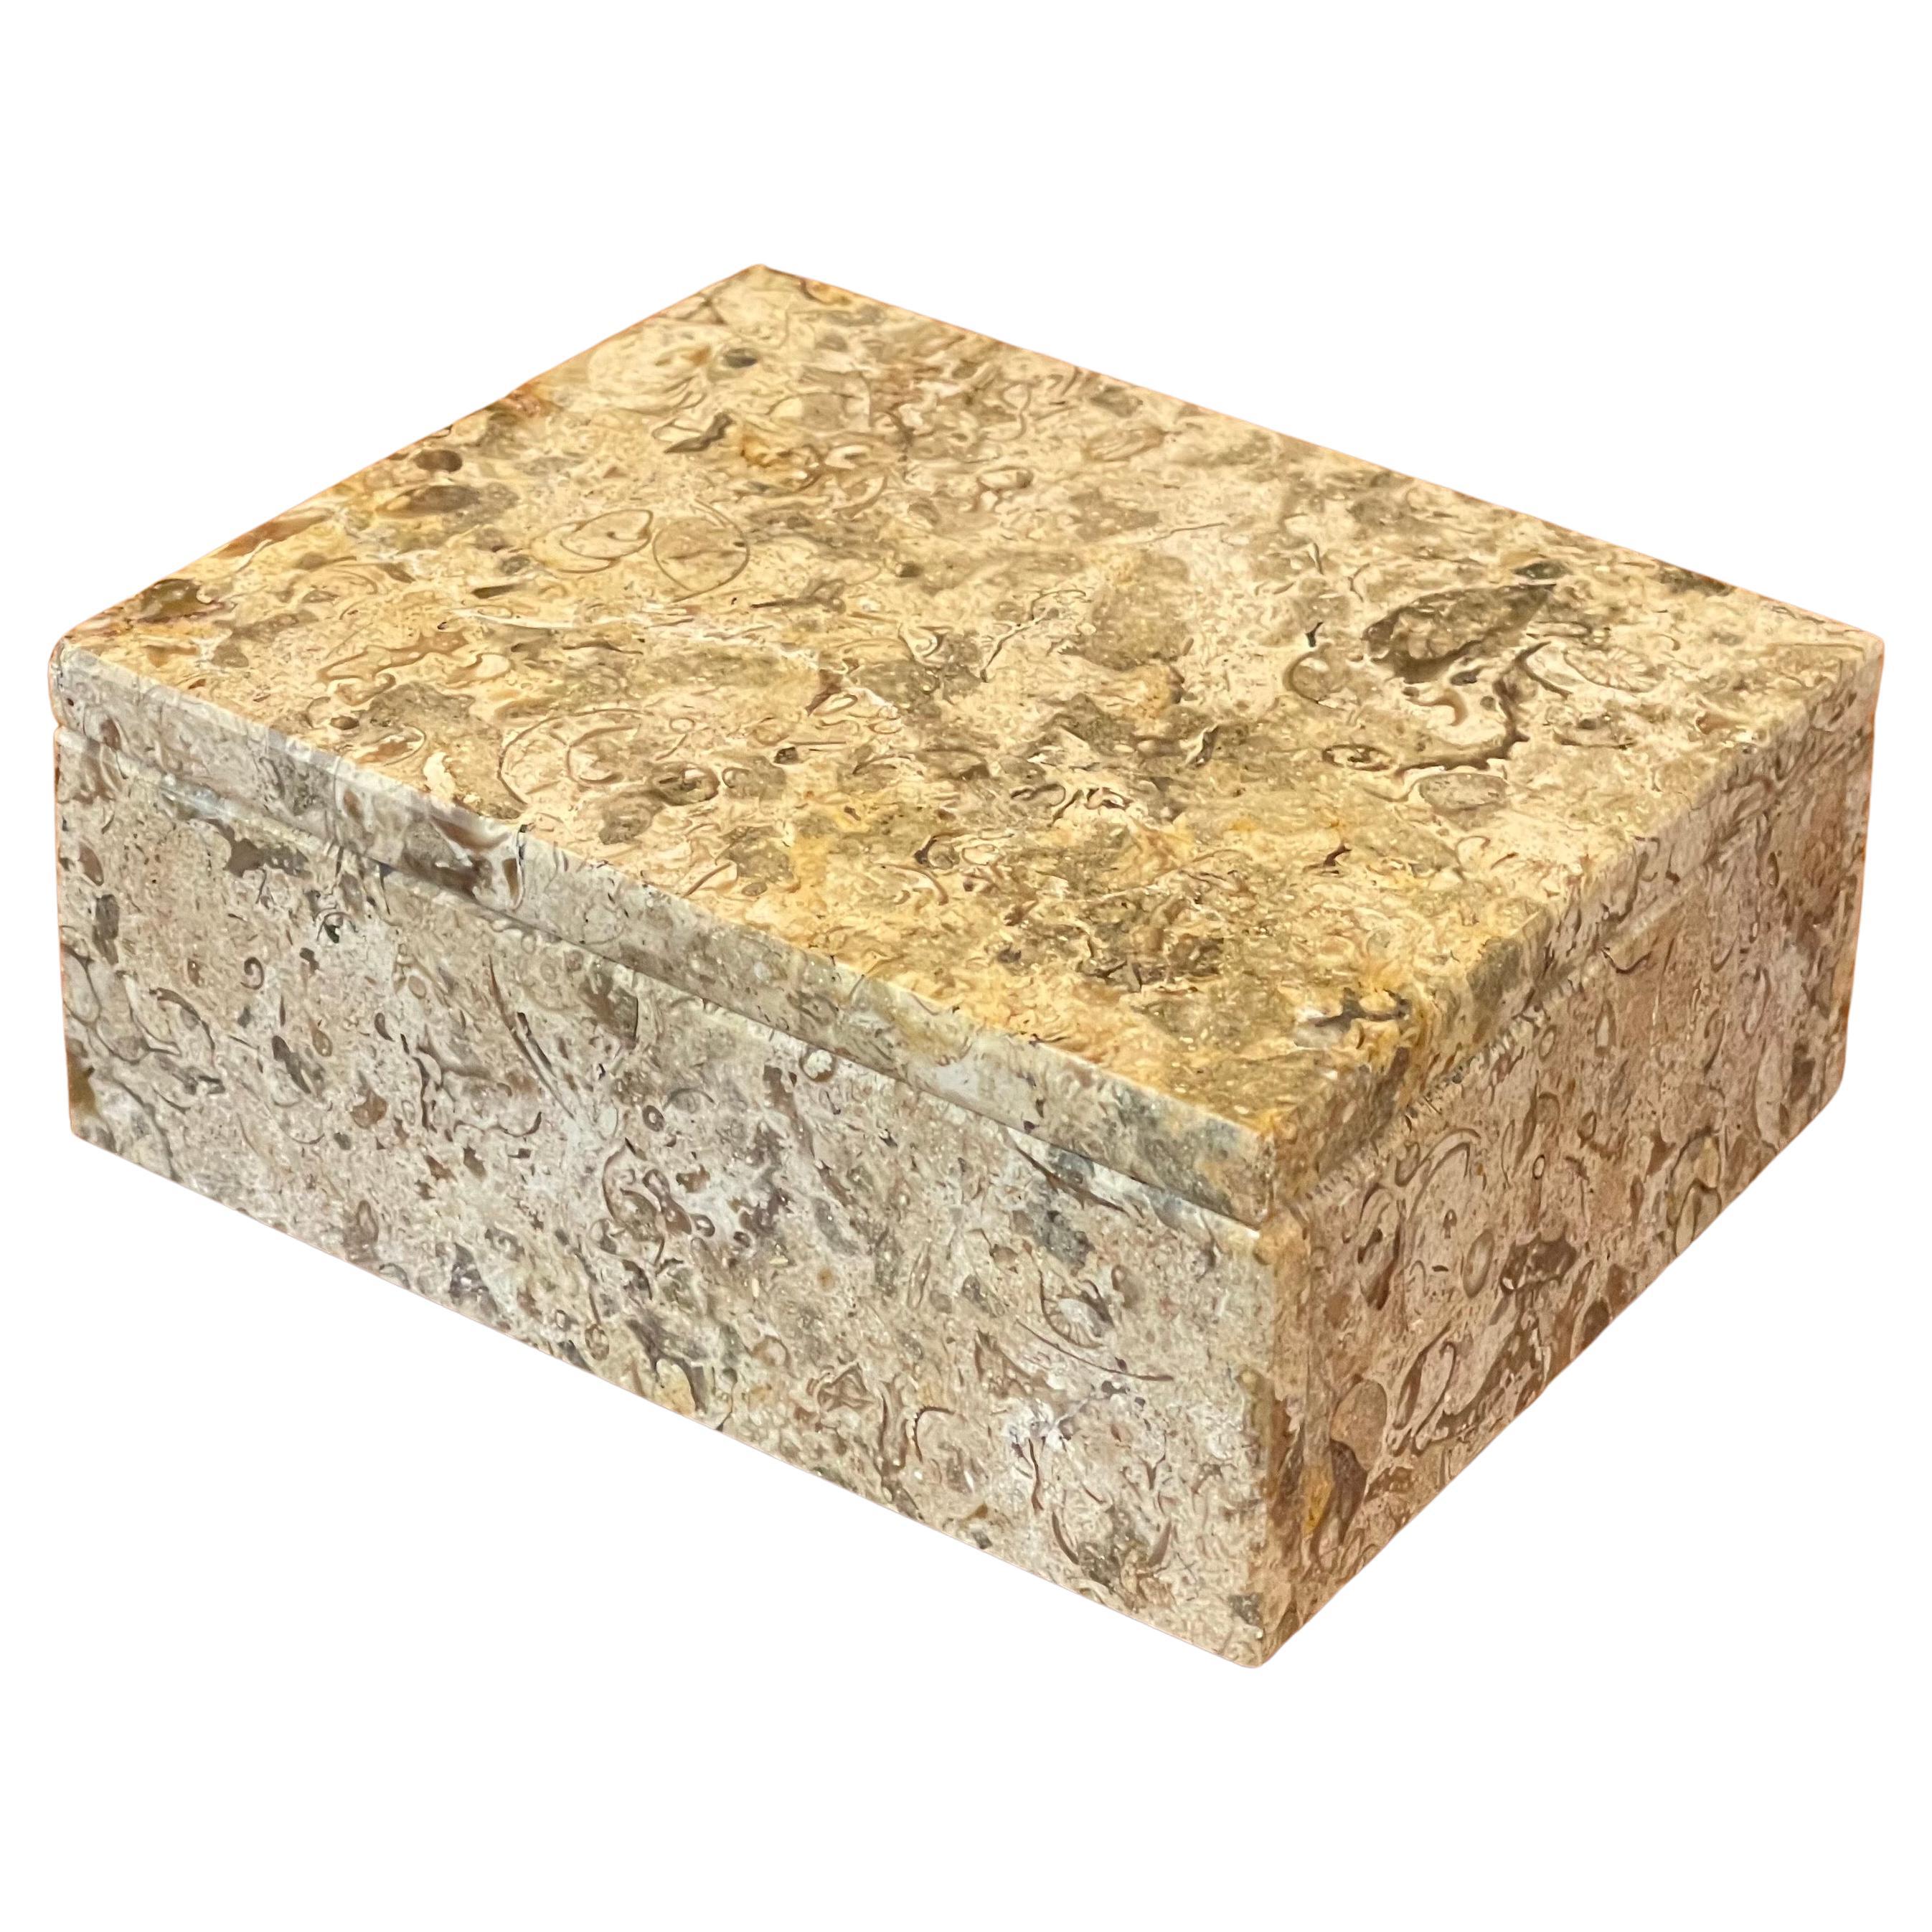 Vintage post-modern travertine lidded trinket box, circa 1980s. The box is in very good vintage condition with no chips or cracks and measures 4.75